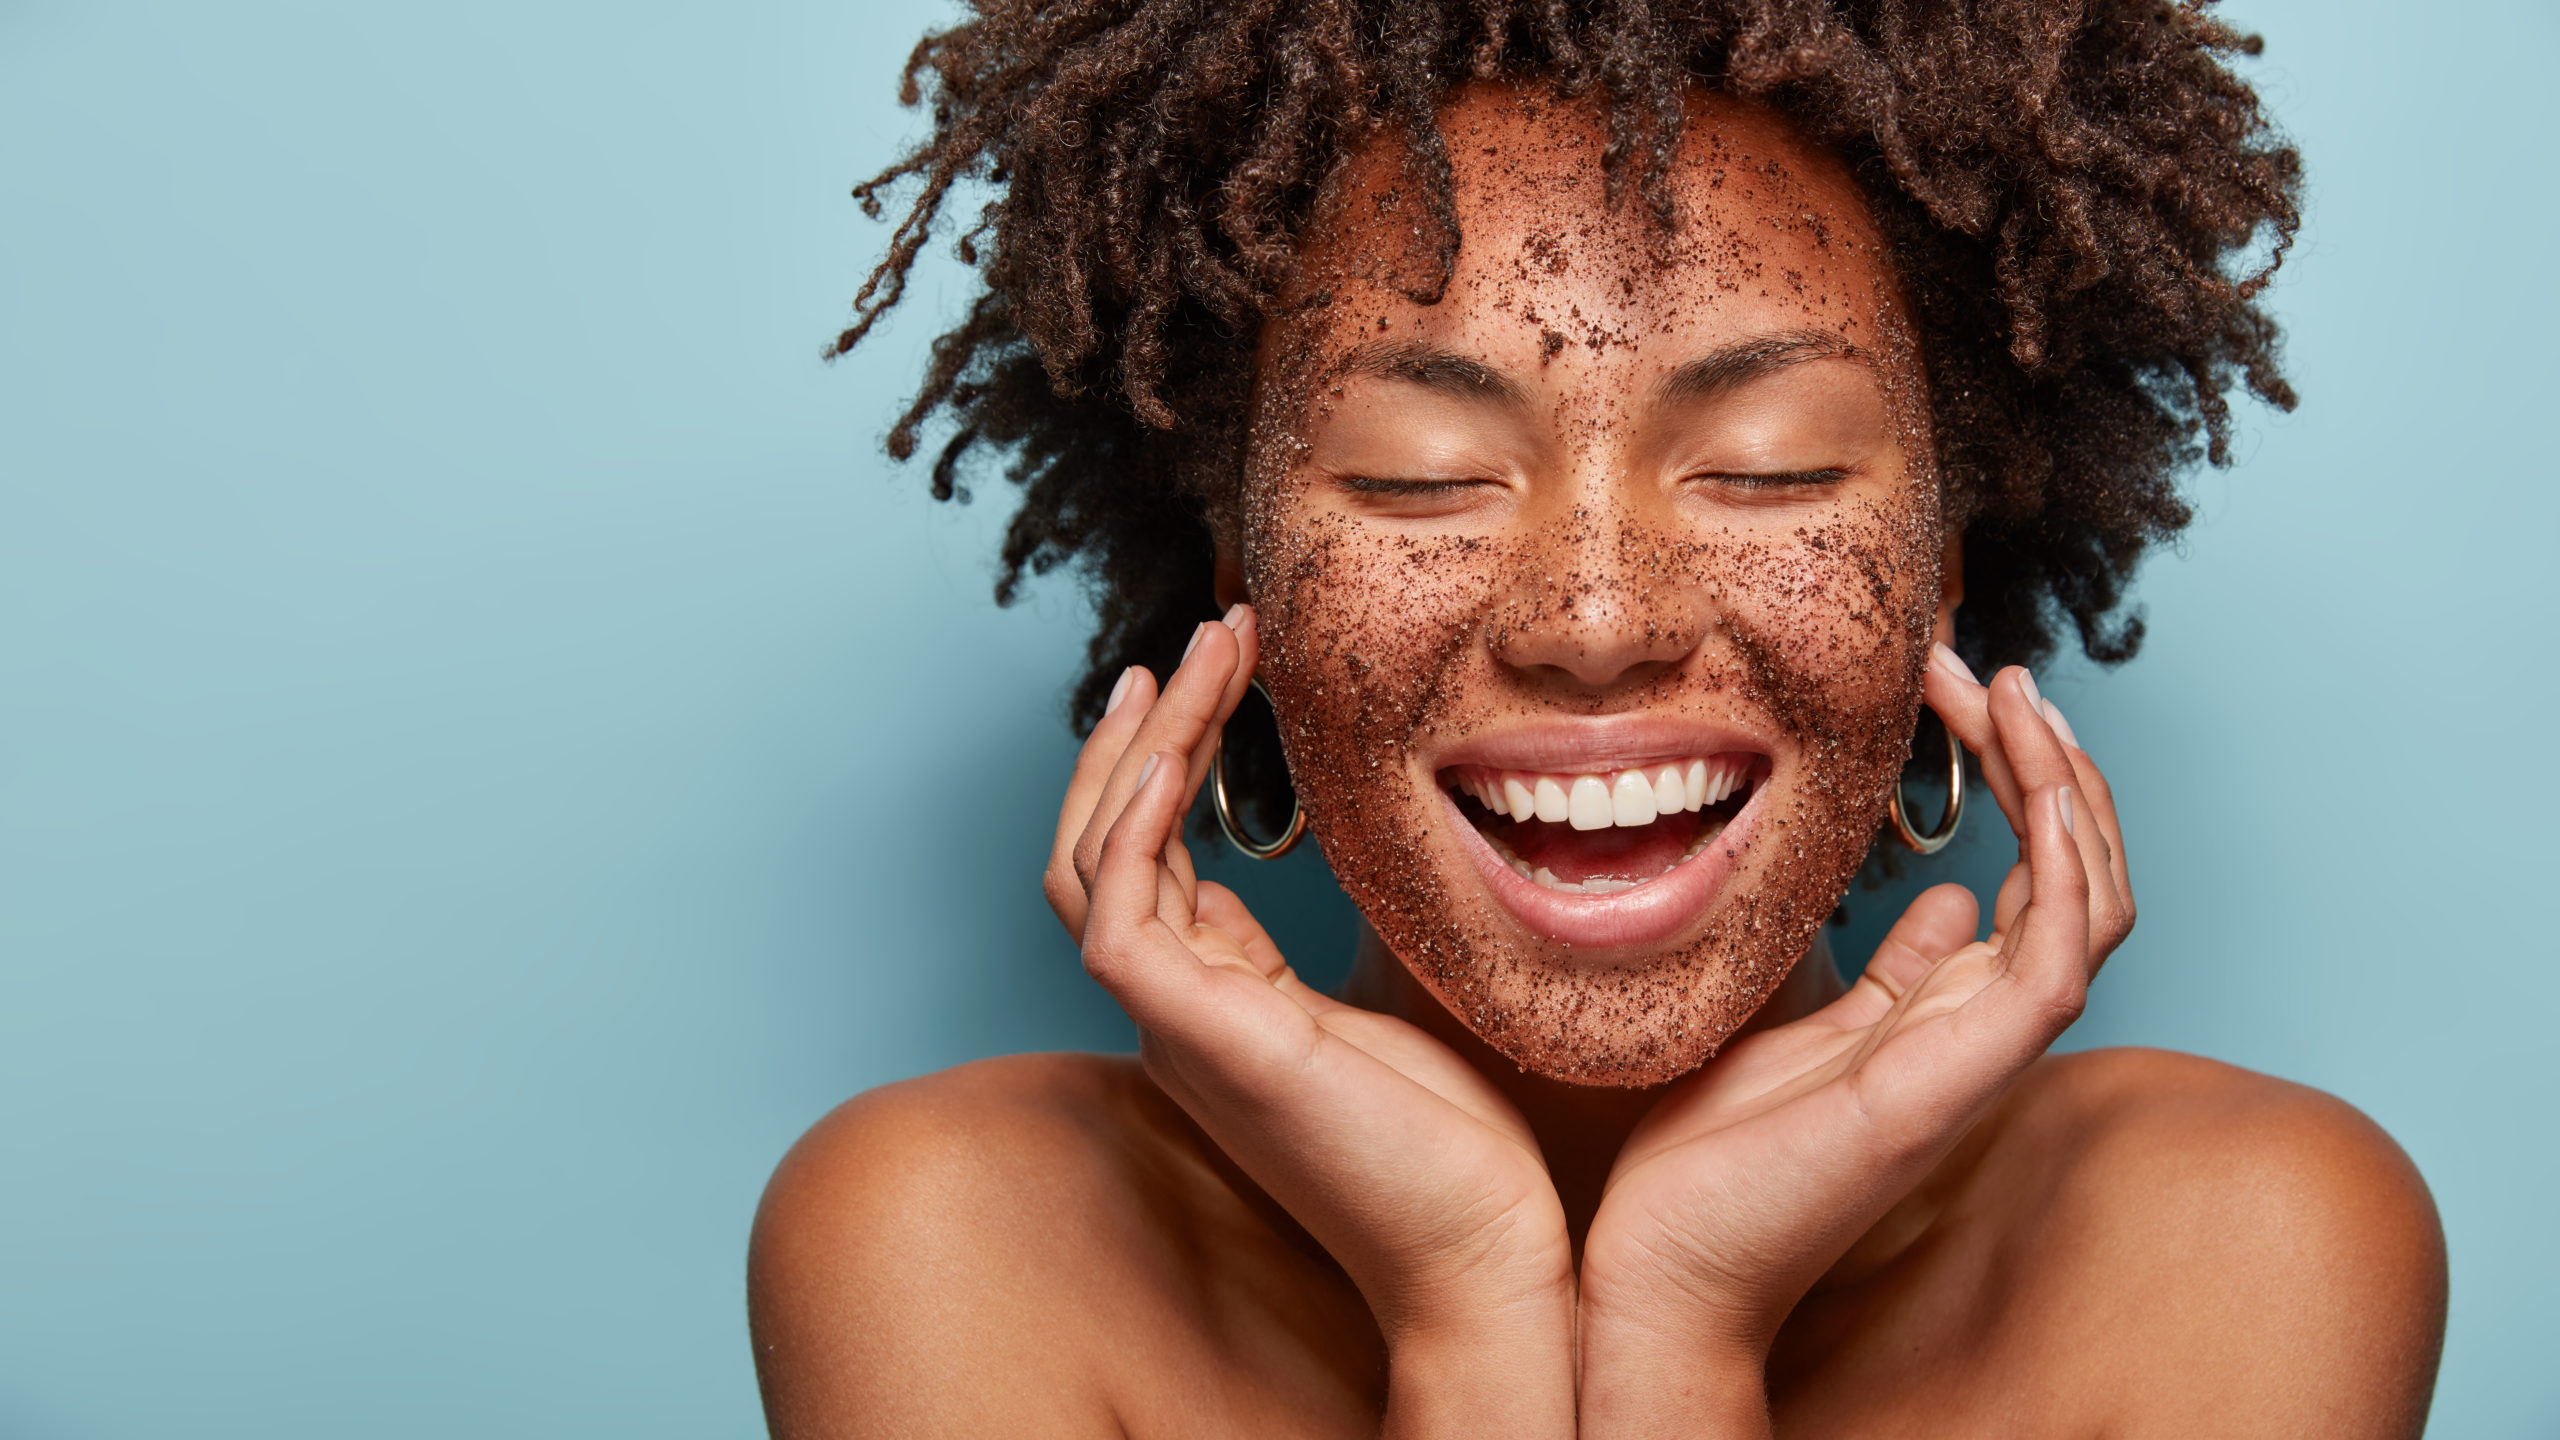 Glow ahead: Coffee grounds cleanse your skin